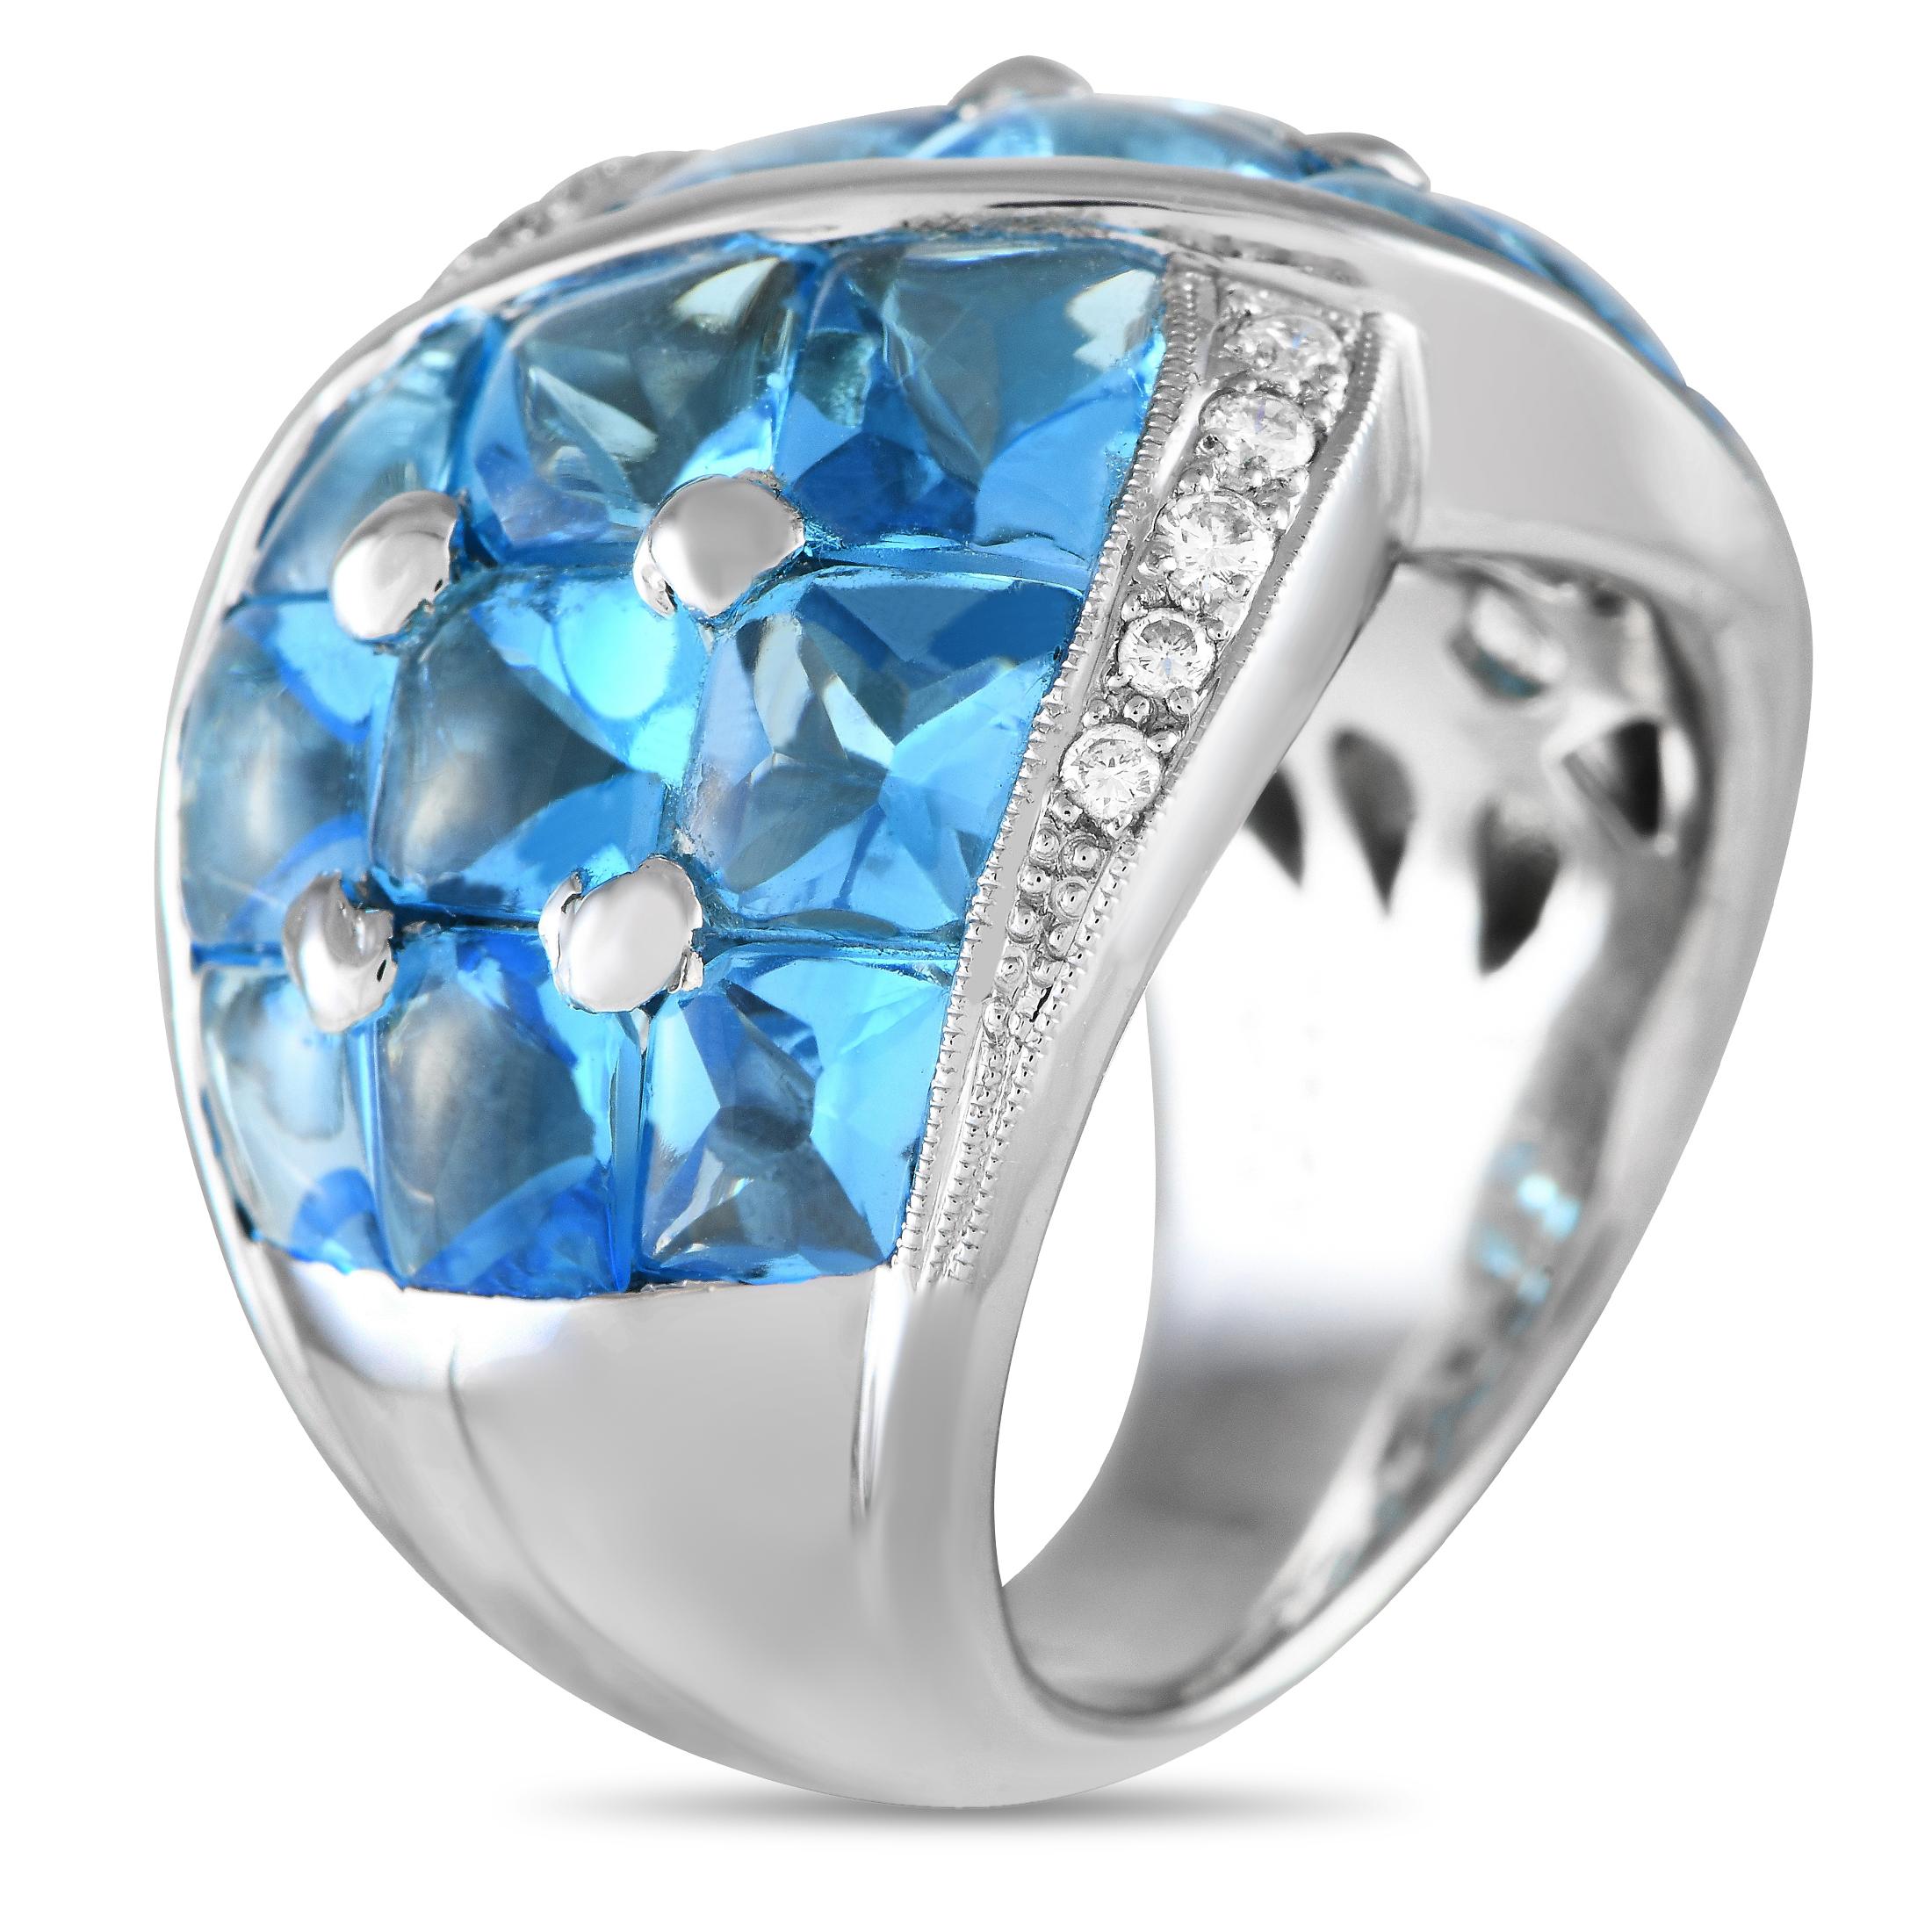 An array of brilliant blue Topaz gemstones totaling 10.68 carats allow this ring to effortlessly add a pop of color to any ensemble. This piece's 18K White Gold setting is also elevated by sparkling inset Diamonds with a total weight of 0.18 carats.